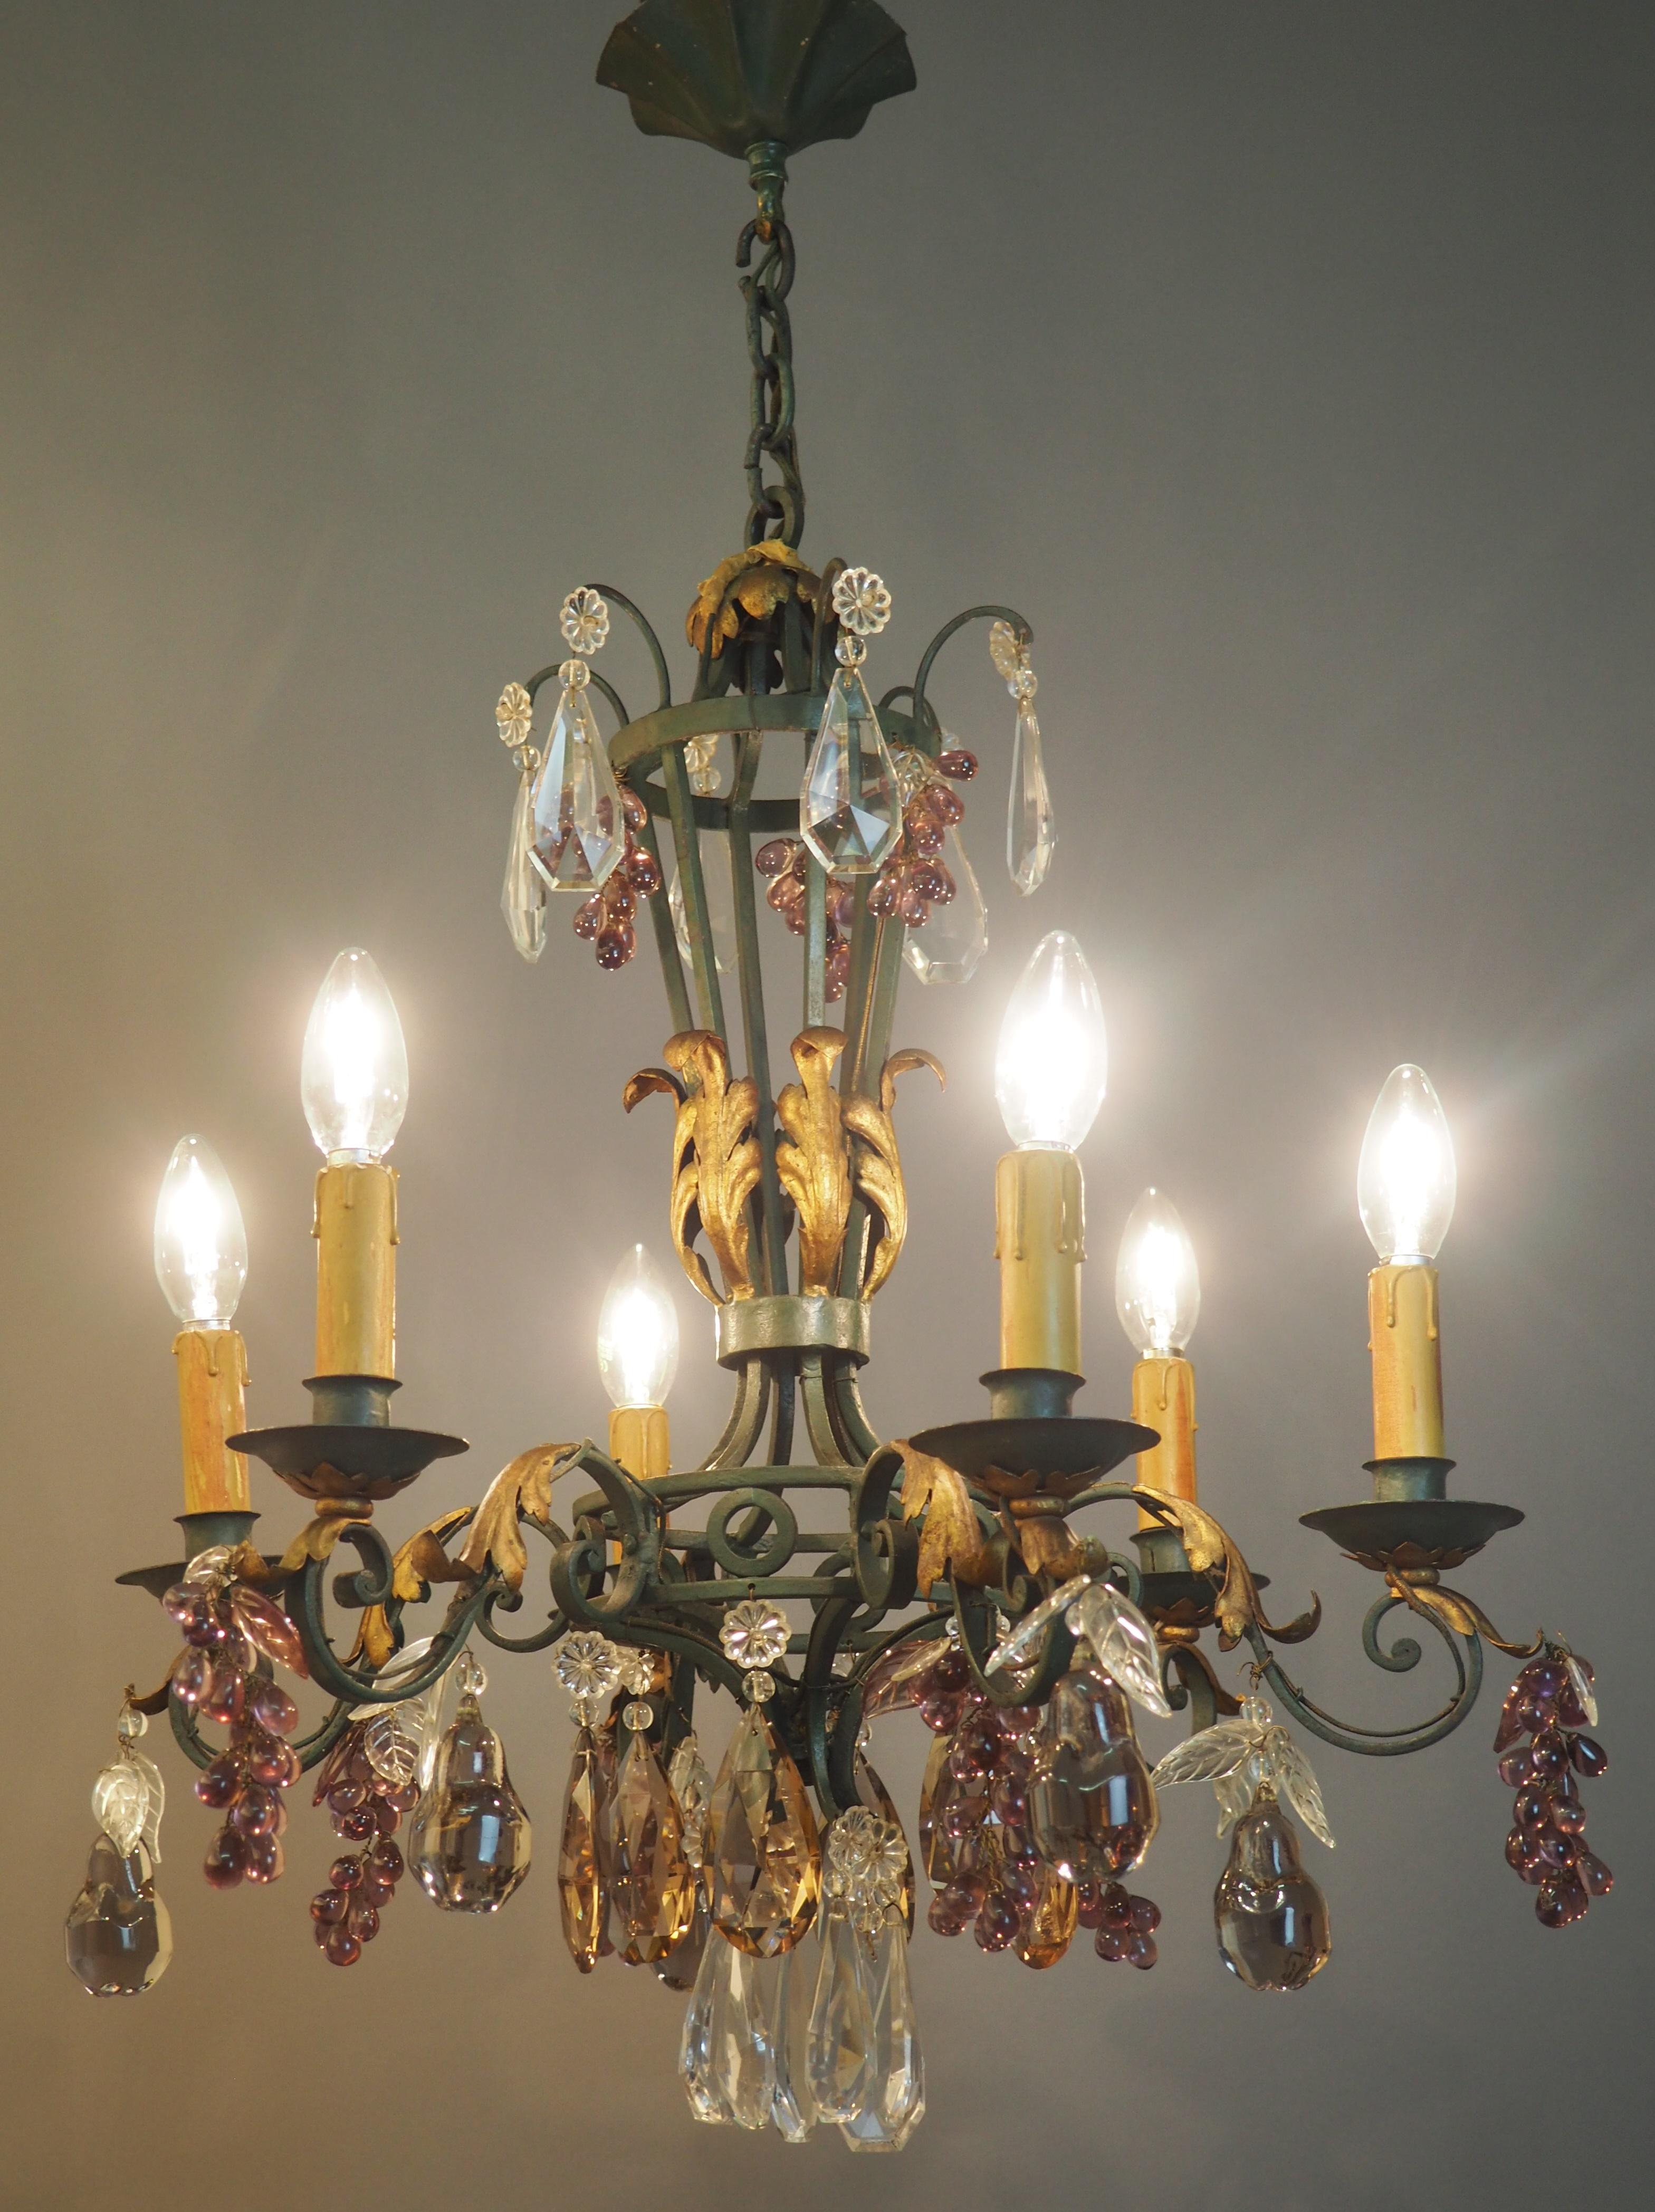 Belle Époque Green Painted and Gilt Wrought Iron Amethyst Chandelier with Fruits, 1900s For Sale